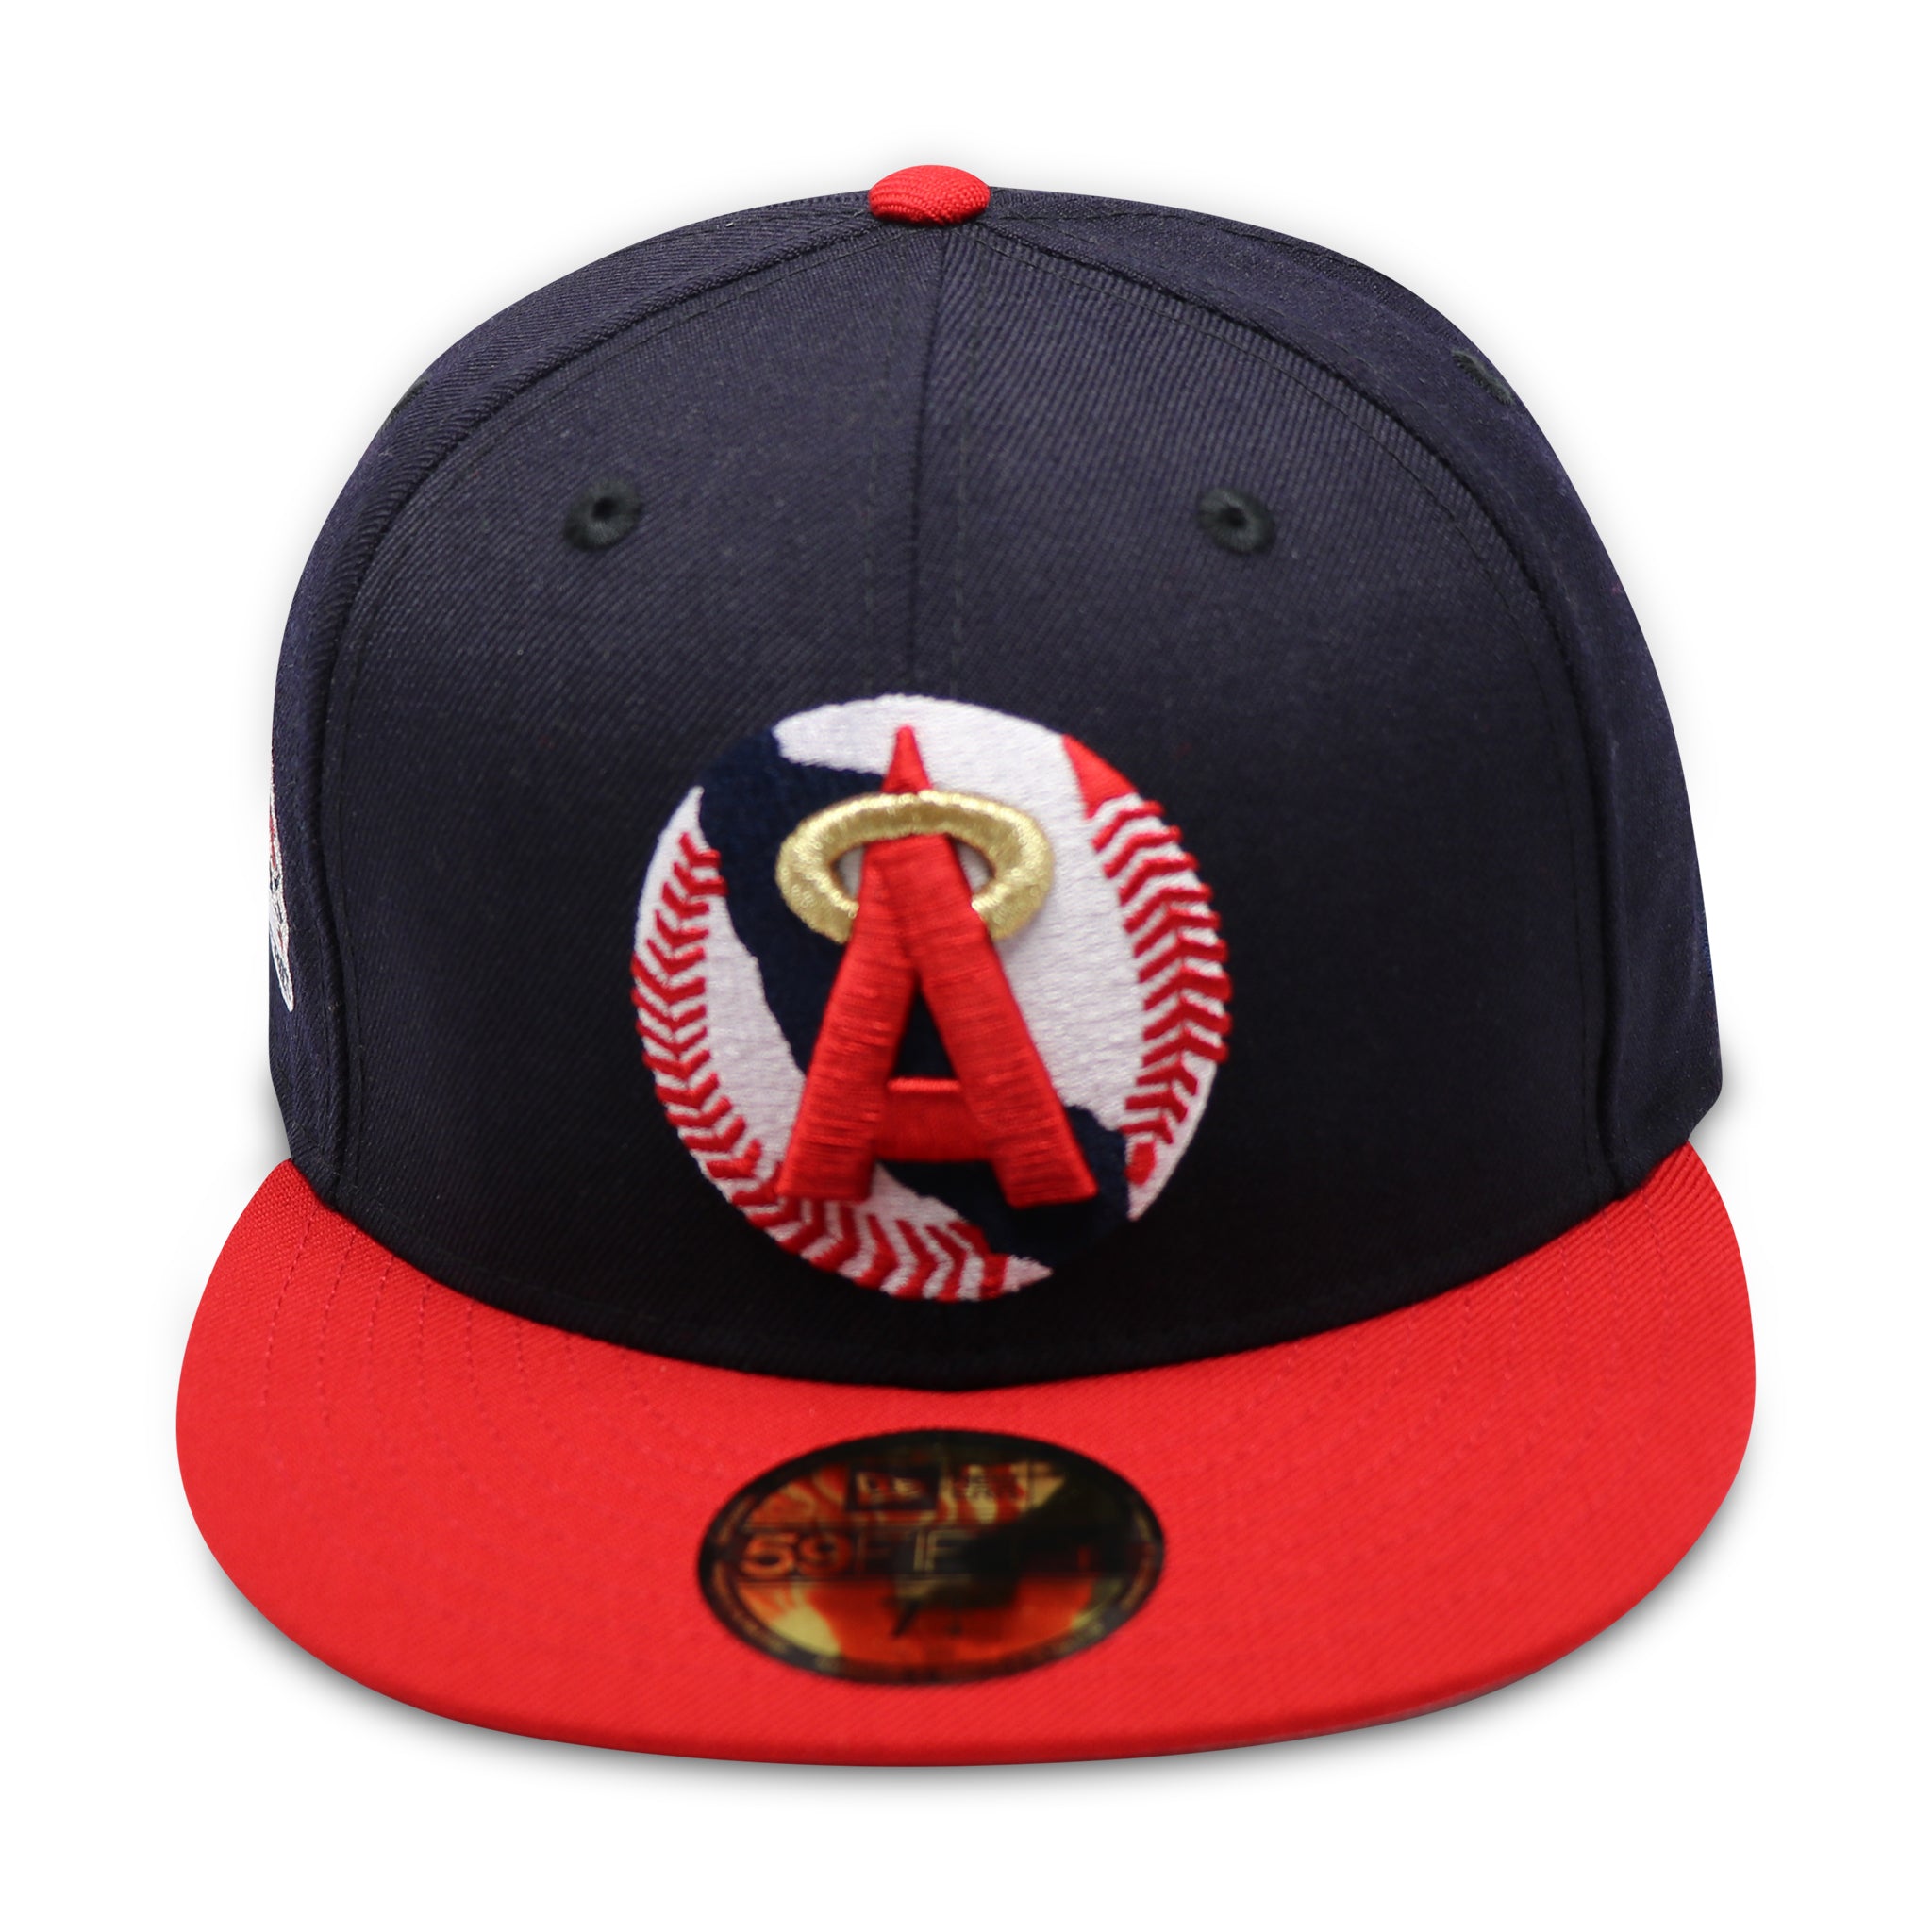 CALIFORNIA ANGELS "35TH ANNIVERSARY" NEW ERA 59FIFTY FITTED